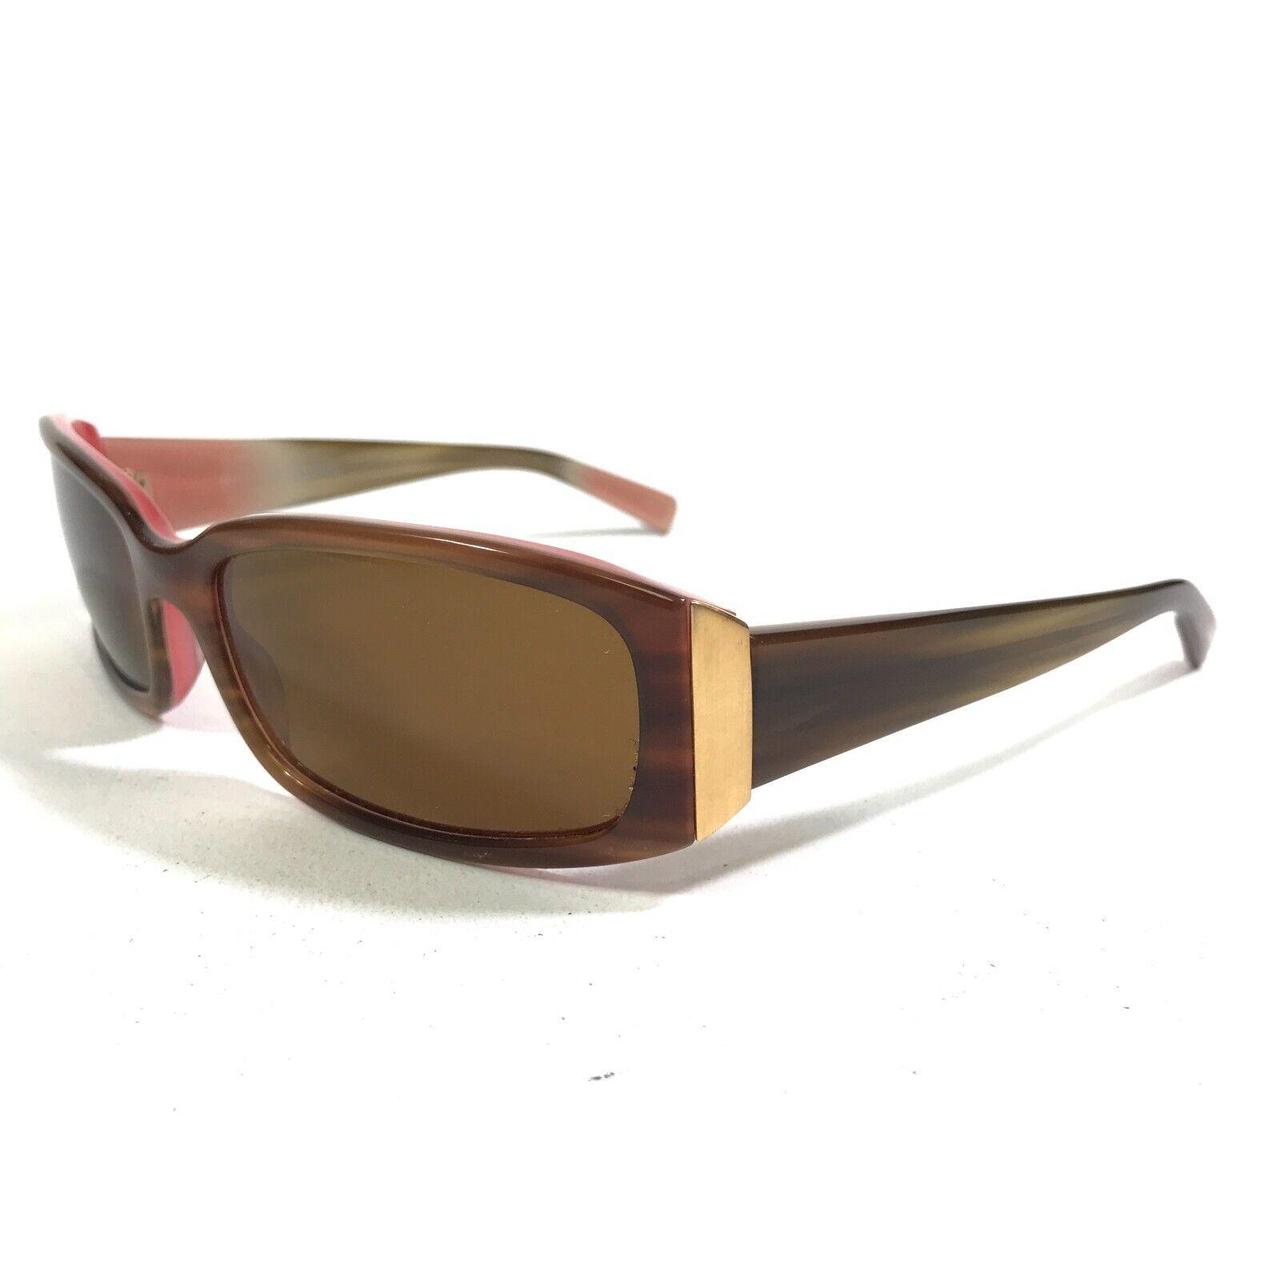 Oliver Peoples Women's Brown and Pink Sunglasses